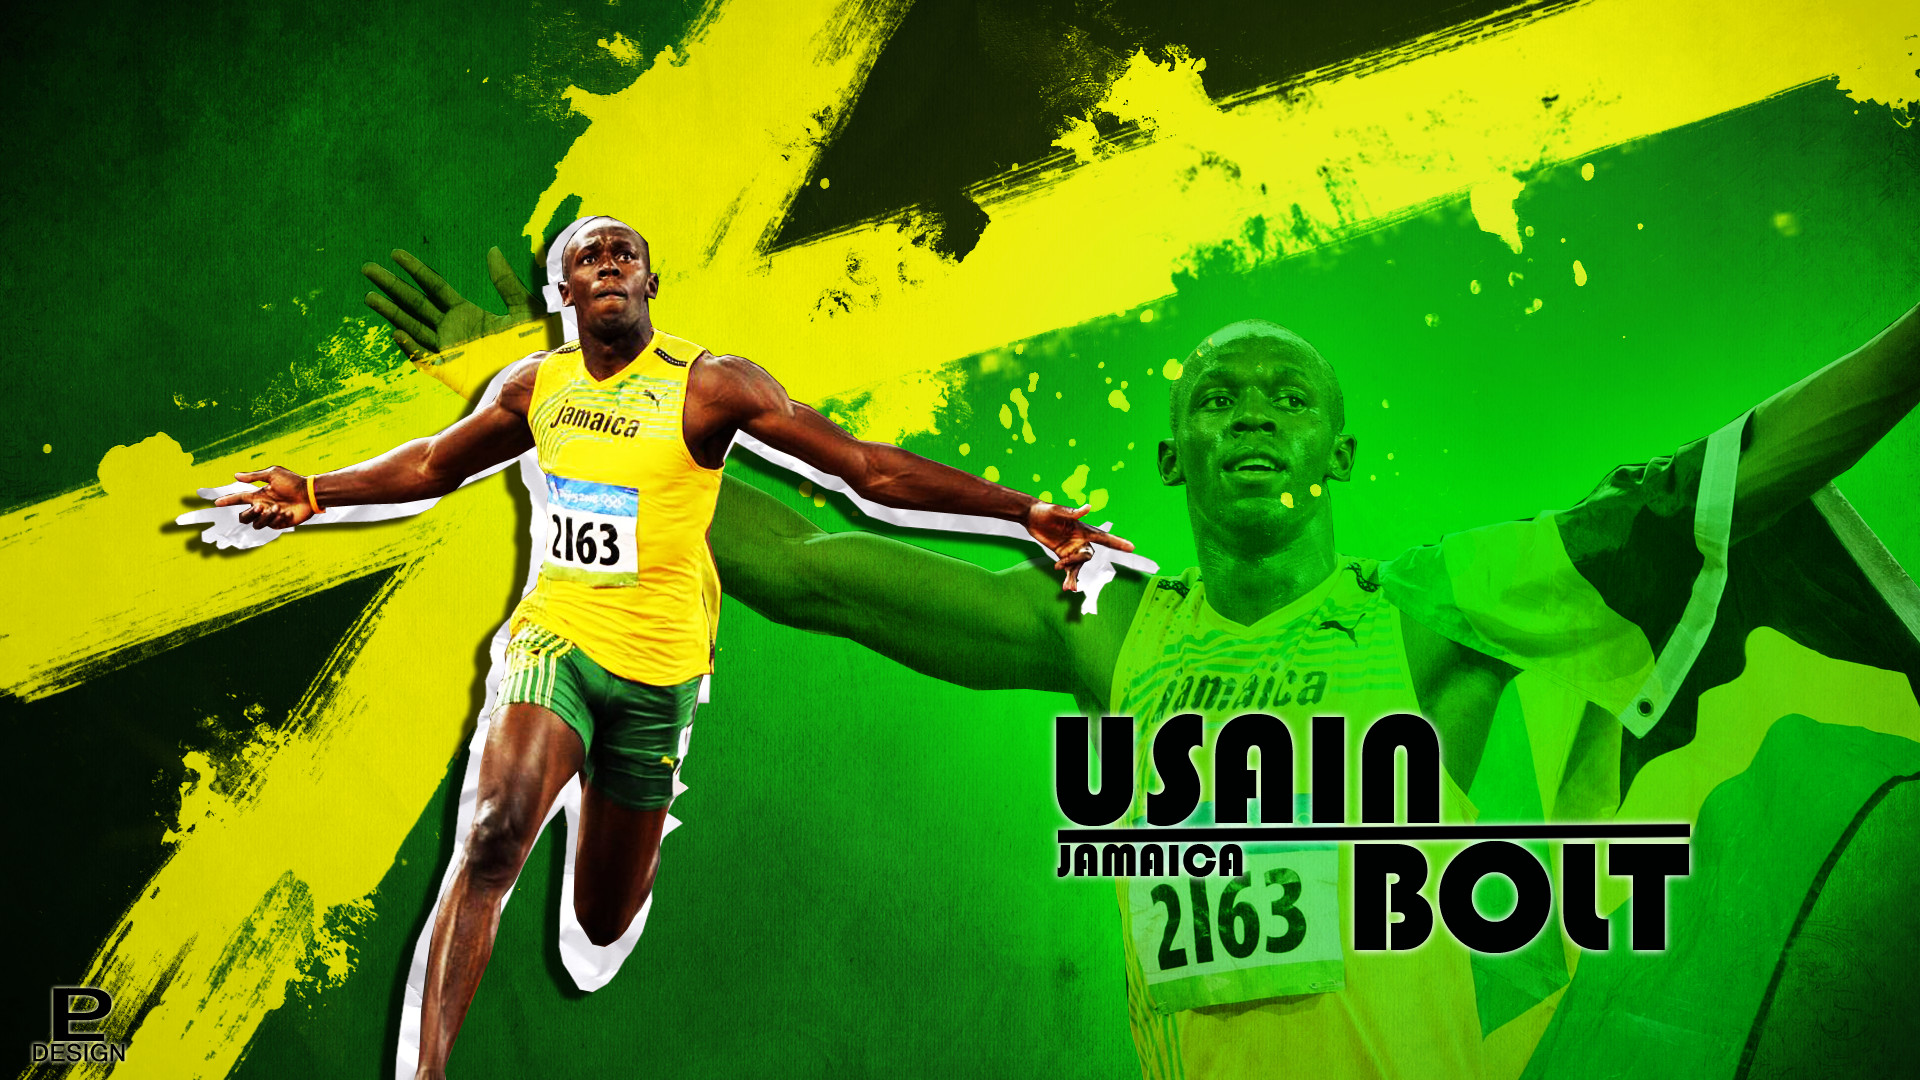 1920x1080 Usain Bolt Olympic Athlete Men's Track and Field Photo Poster